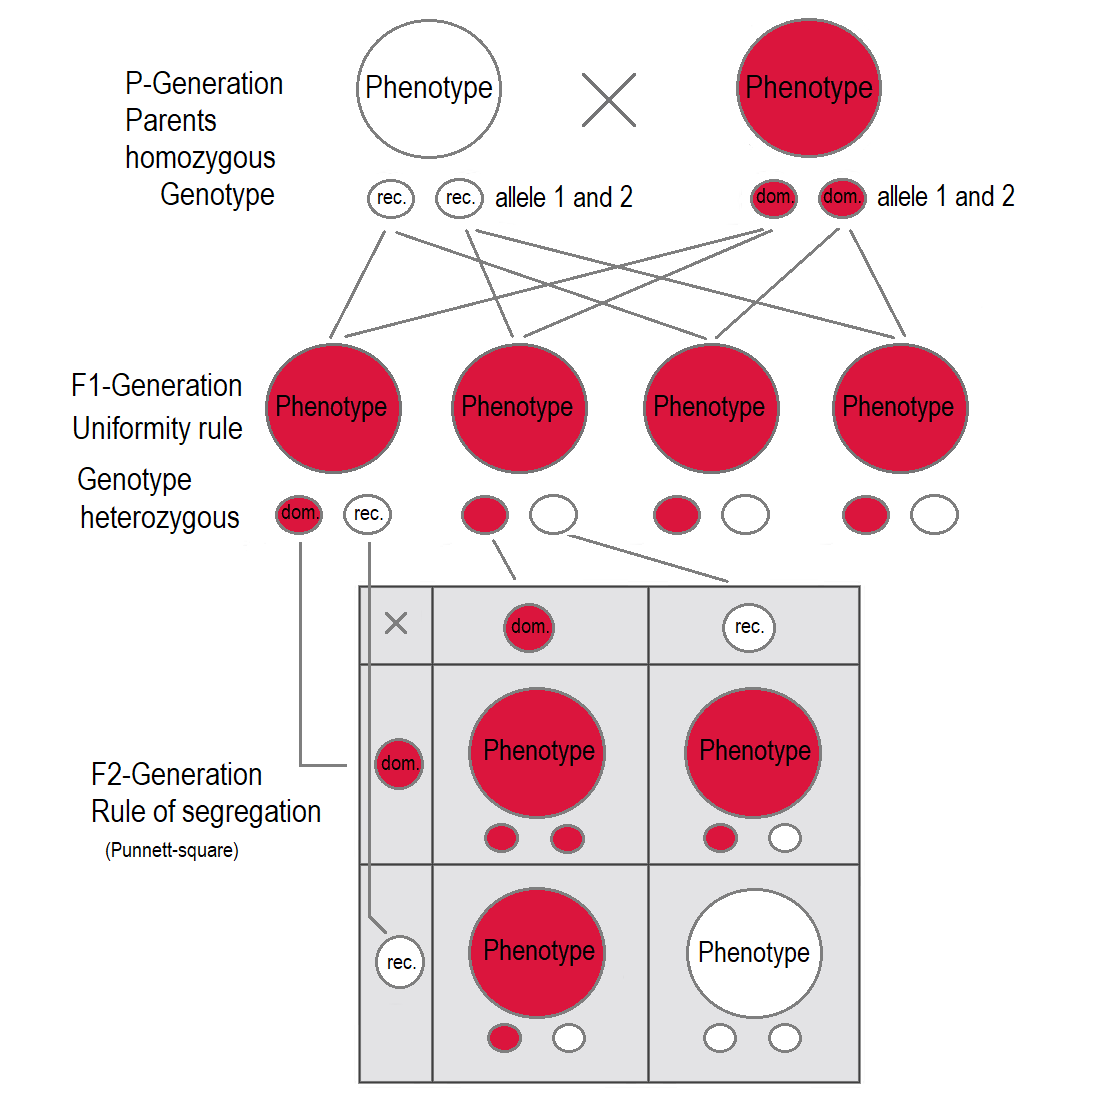 In the F1 generation all individuals have the same genotype and same phenotype expressing the dominant trait (red). In the F2 generation, the phenotypes show a 3:1 ratio. In the genotype 25% are homozygous with the dominant trait, 50% are heterozygous genetic carriers of the recessive trait, 25% are homozygous with the recessive genetic trait and expressing the recessive character.